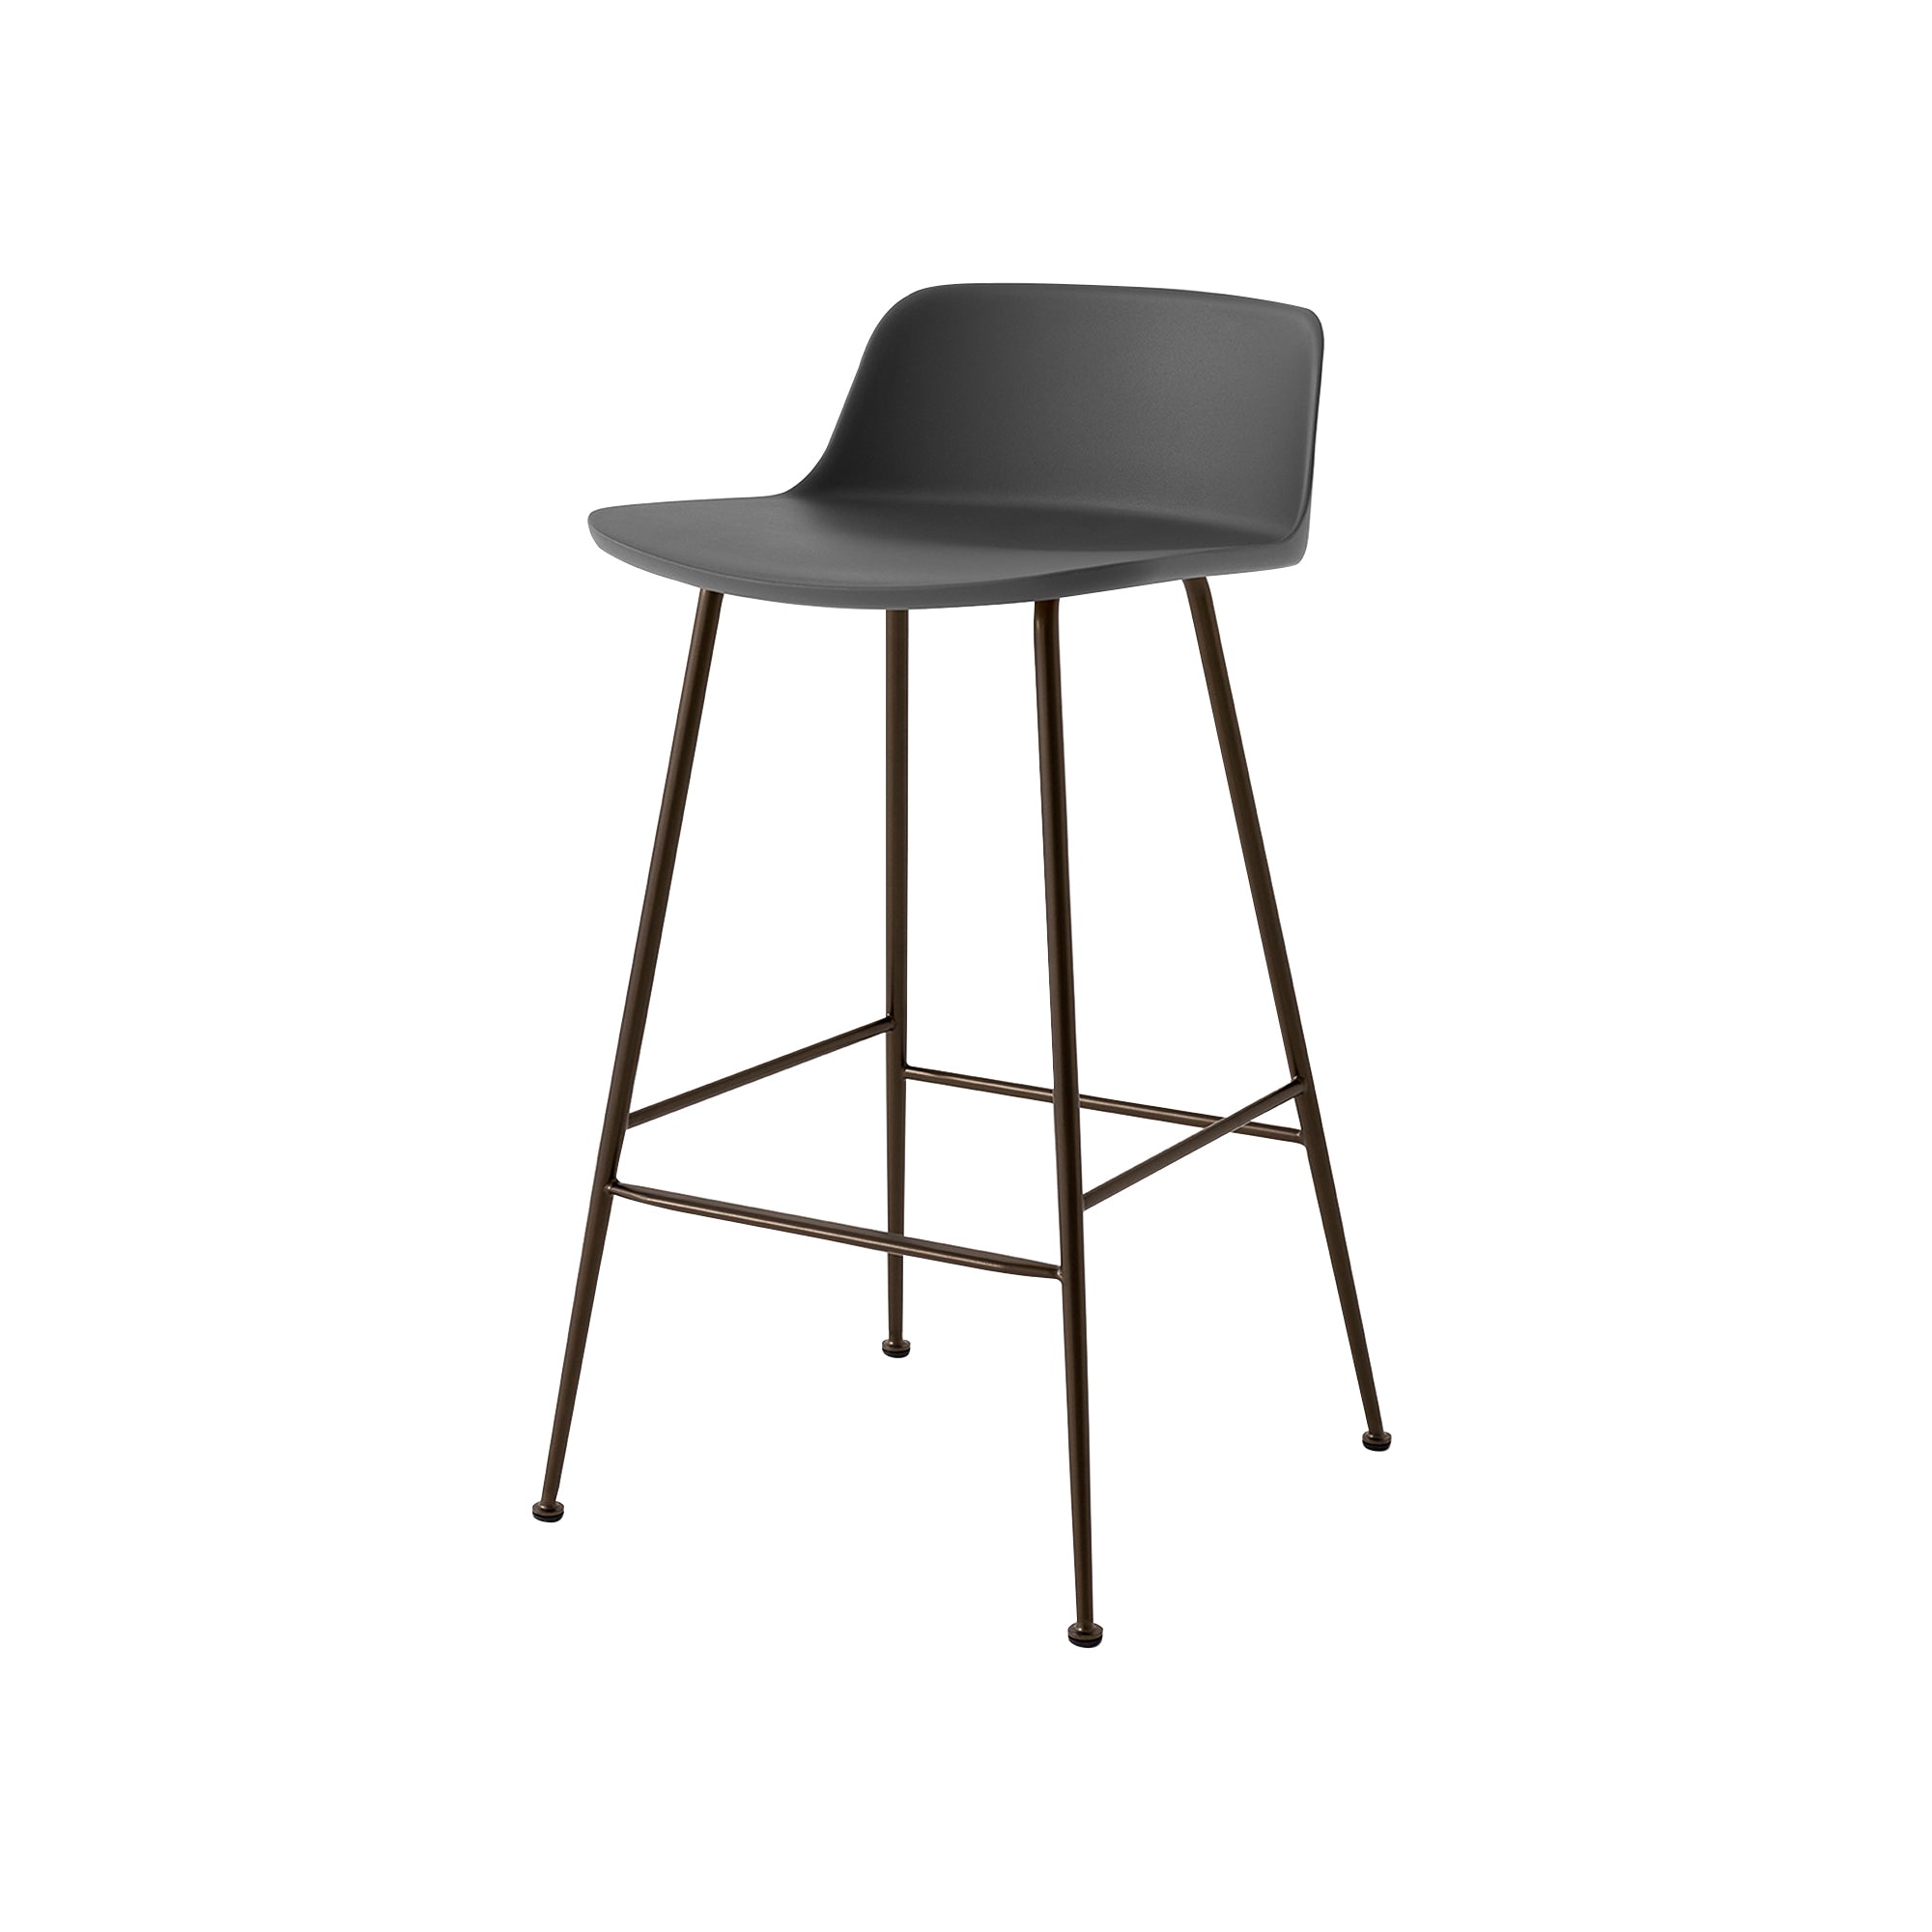 Rely Bar + Counter Lowback Stool: HW81 + HW86 + Counter (HW81) + Stone Grey + Bronzed